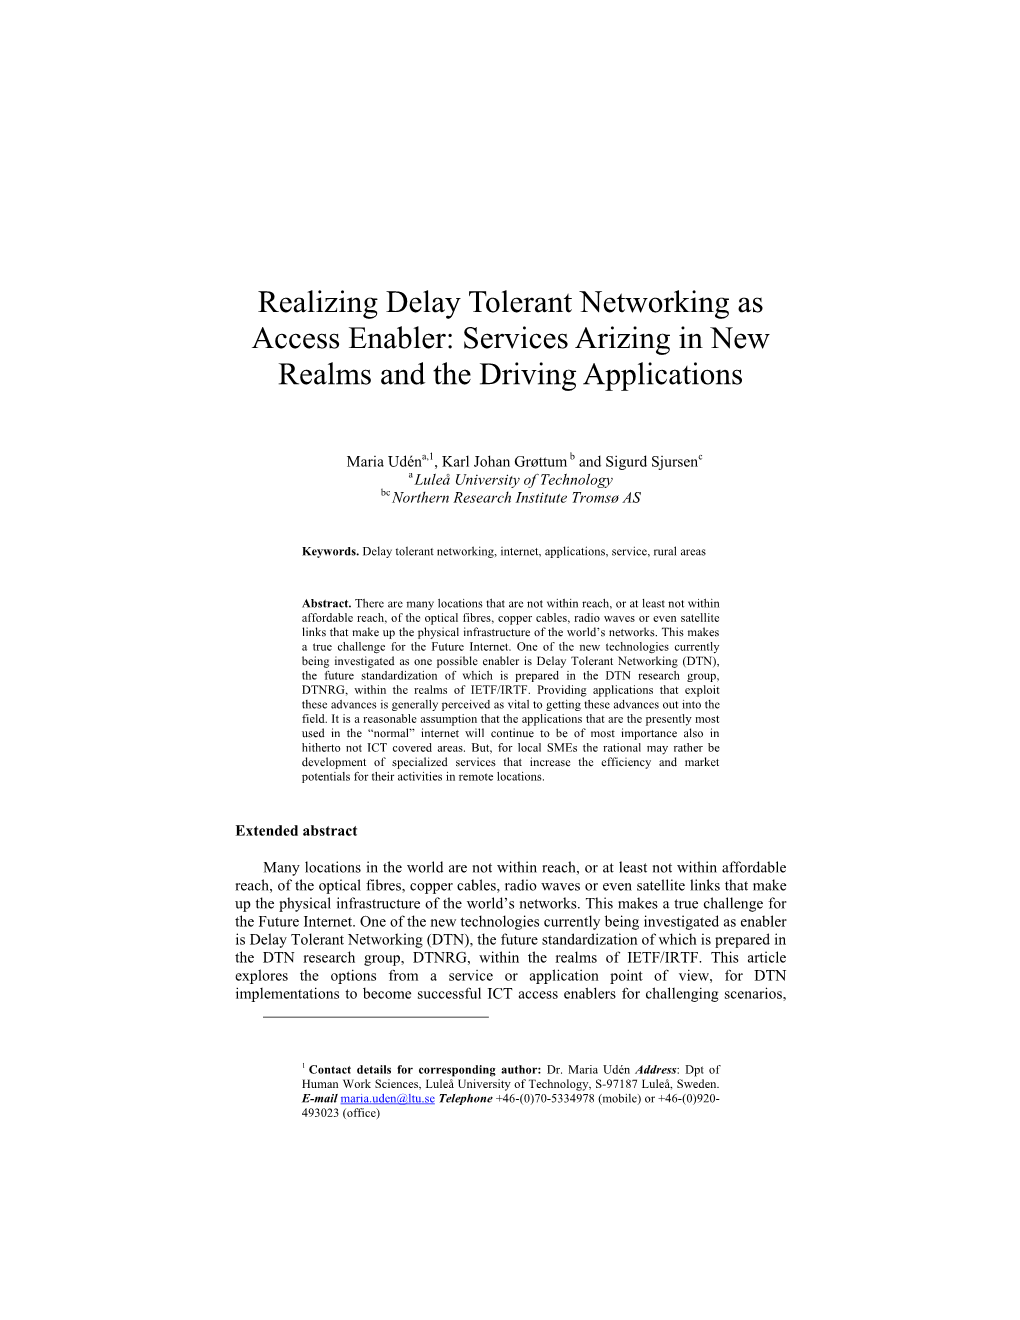 Realizing Delay Tolerant Networking As Access Enabler: Services Arizing in New Realms and the Driving Applications